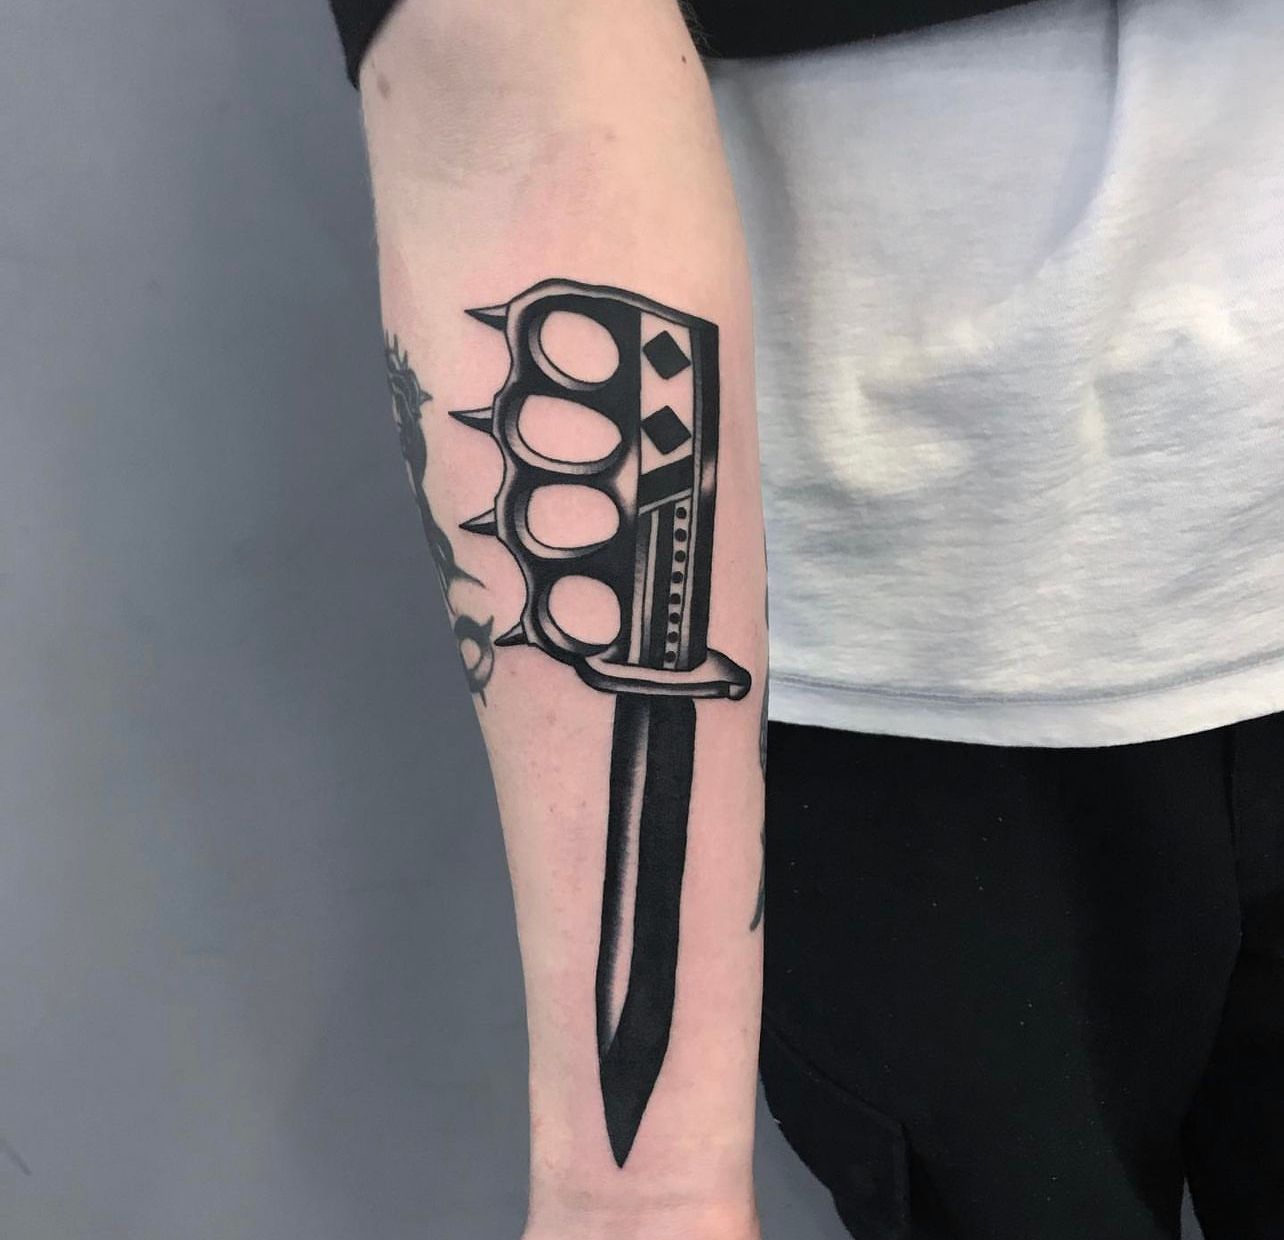 Ironside Tattoo & Piercing - @jsark did this rad trench knife and rose  piece! Who else has a rad #daggerandrose tattoo? . . . . . . . . . .  #ironside #